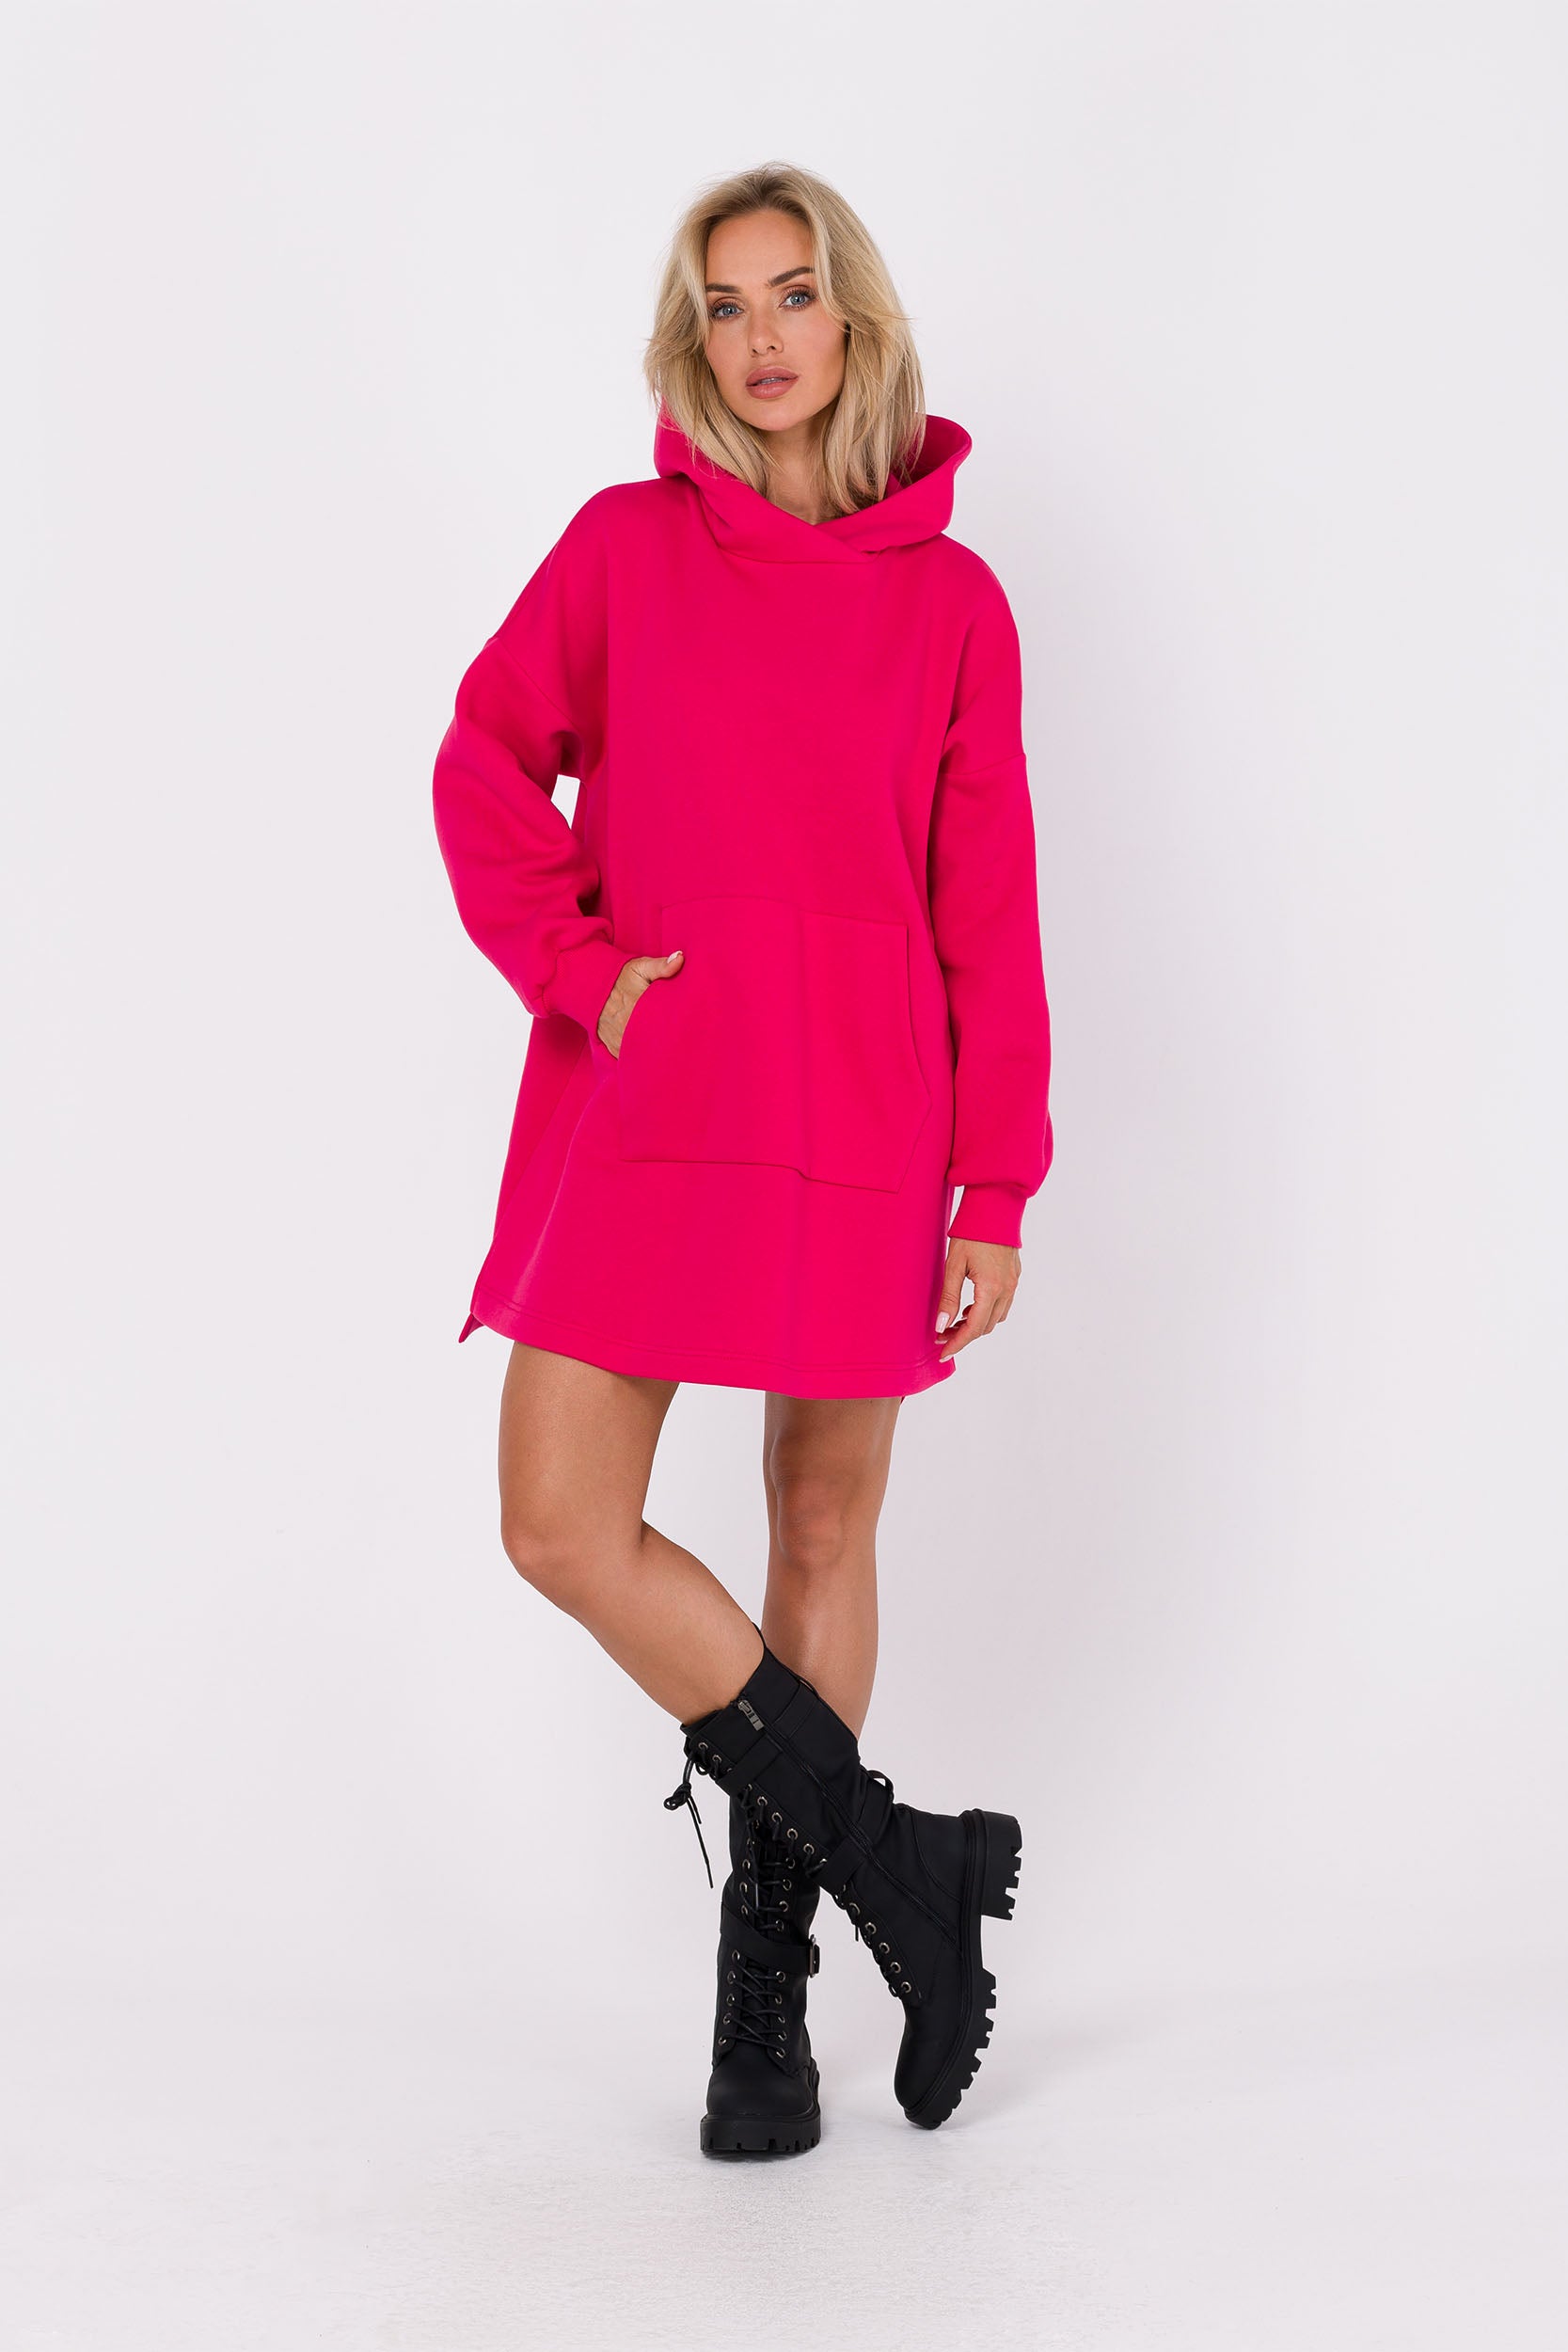 Hooded Sweatshirt Dress Mini | Strictly In | Embrace laid-back style with our Hooded Mini Sweatshirt Dress. Crafted for comfort, this knit tunic dress features a hood, kangaroo pocket, and side splits. Ideal for casual outings, wear it with sneakers or boots.